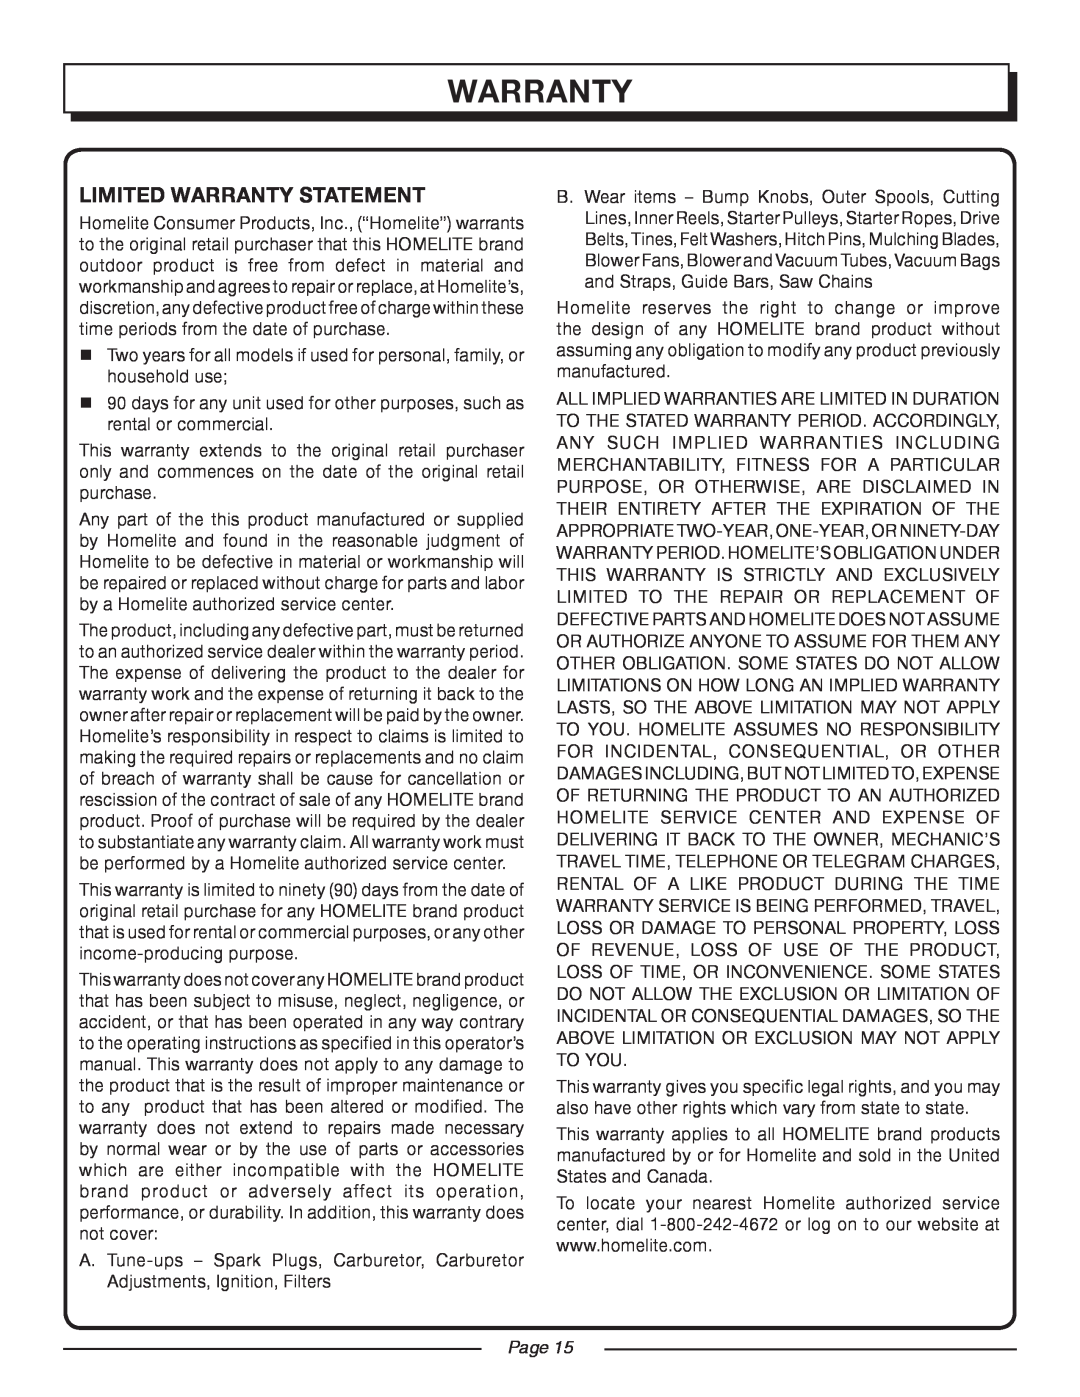 Homelite UT44160 manual Limited Warranty Statement, Page 